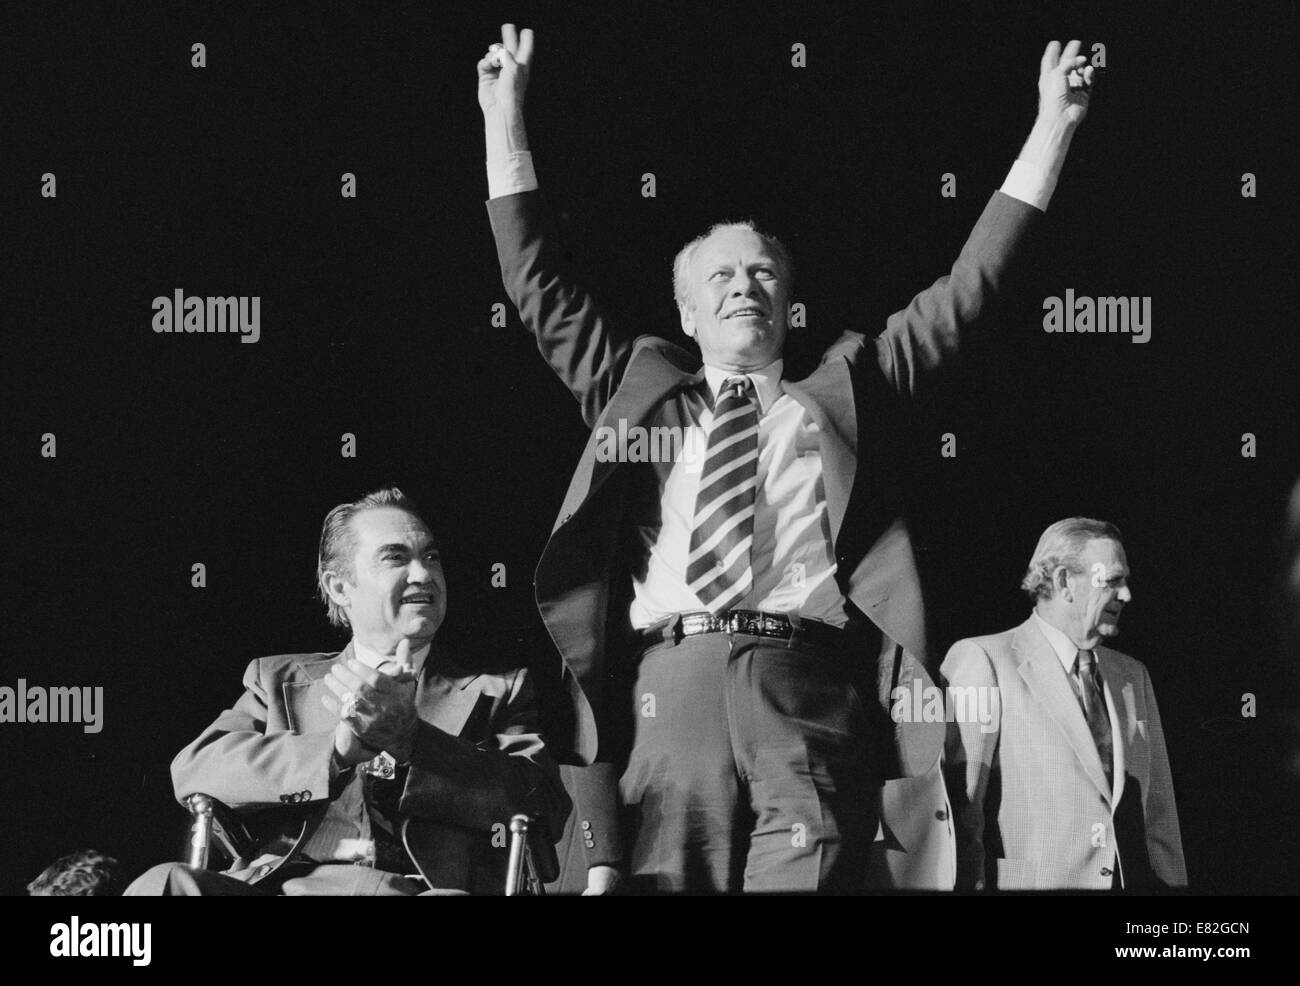 President Gerald Ford makes a victory sign as George Wallace applauds at a campaign stop in the South. September 1976 Stock Photo